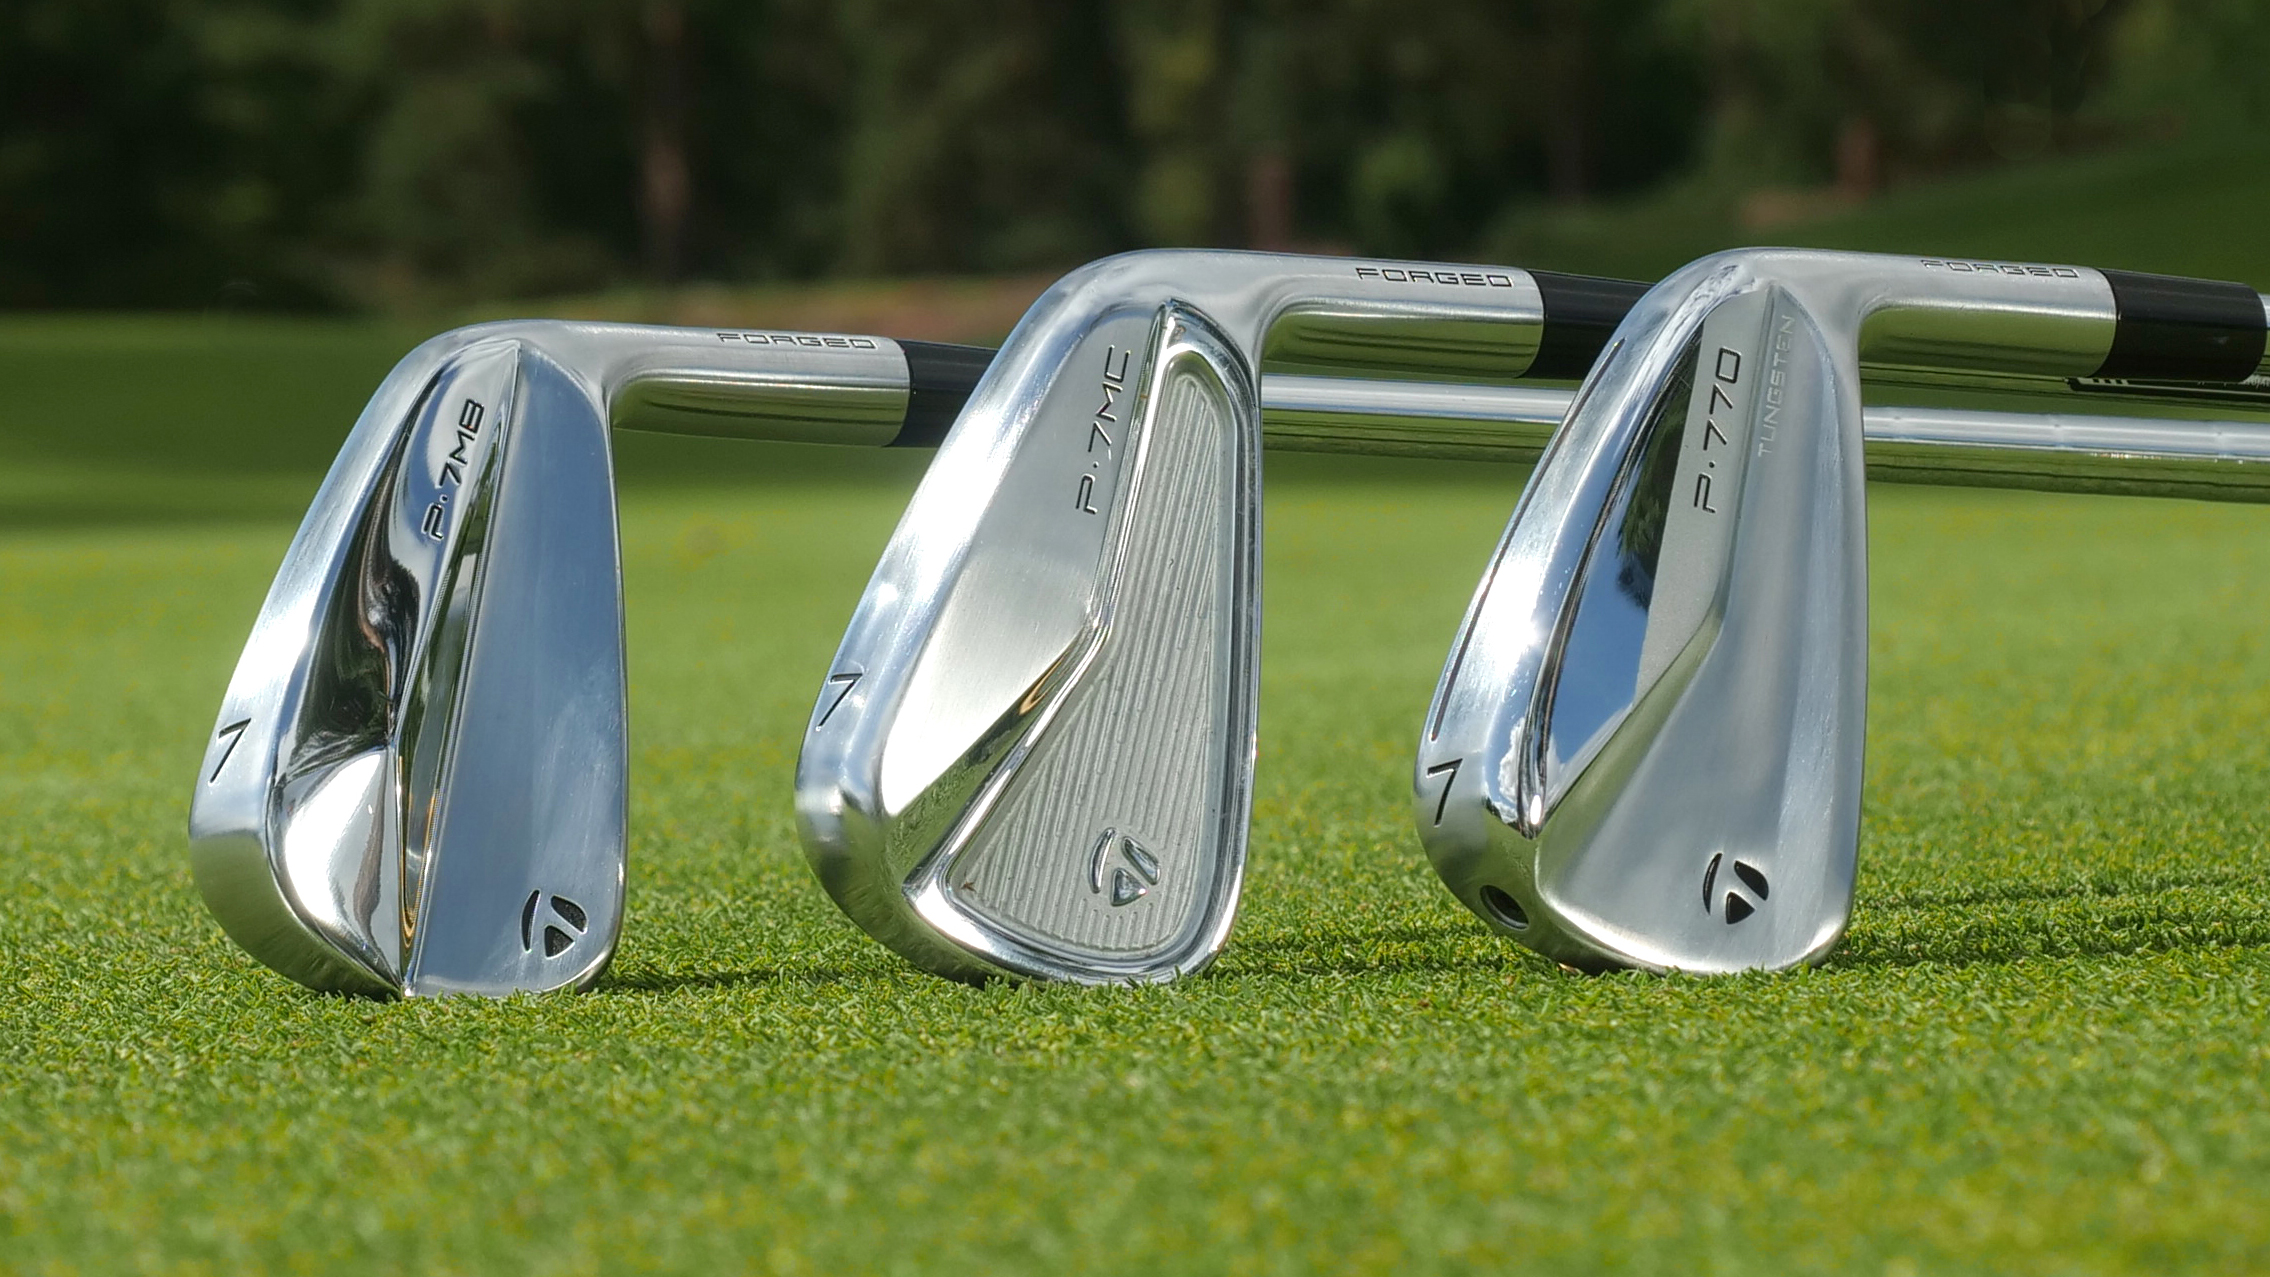 TaylorMade P-Series Irons Review - P770, P7MC and P7MBs tested | Golf